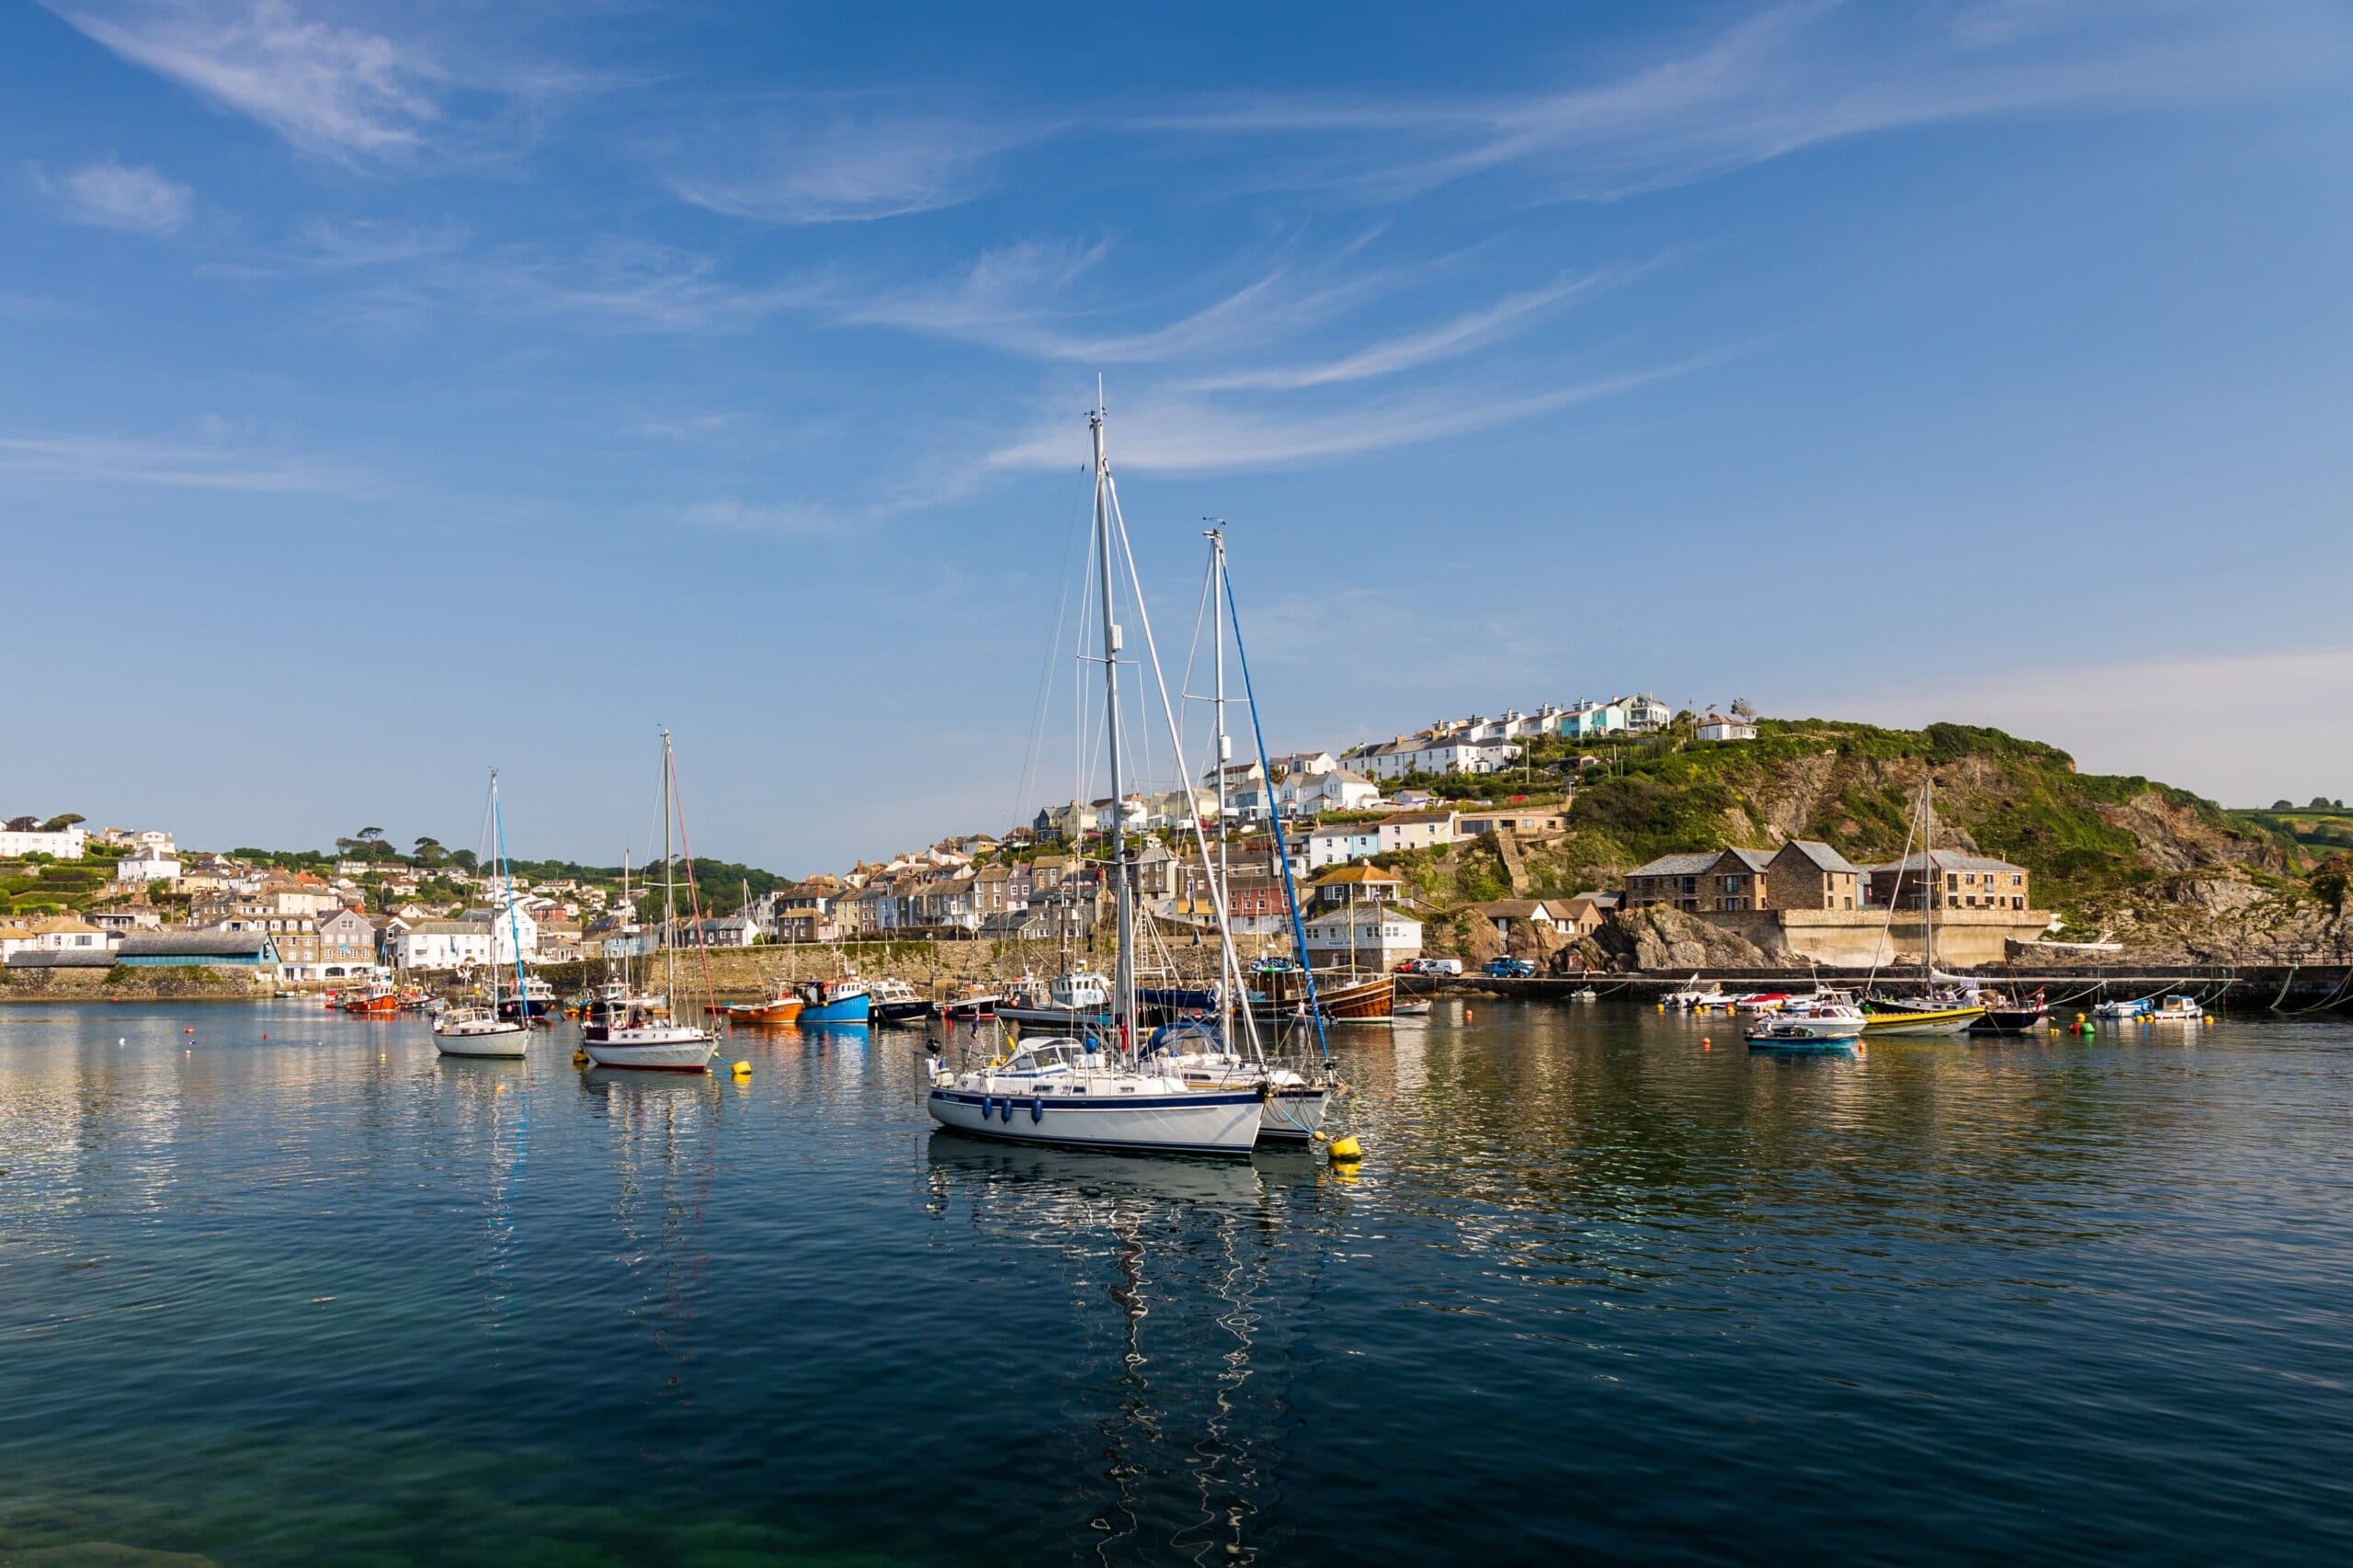 A stock image of Mevagissey, Cornwall - start your search for Shared Ownership properties in Cornwall on Share to Buy today!